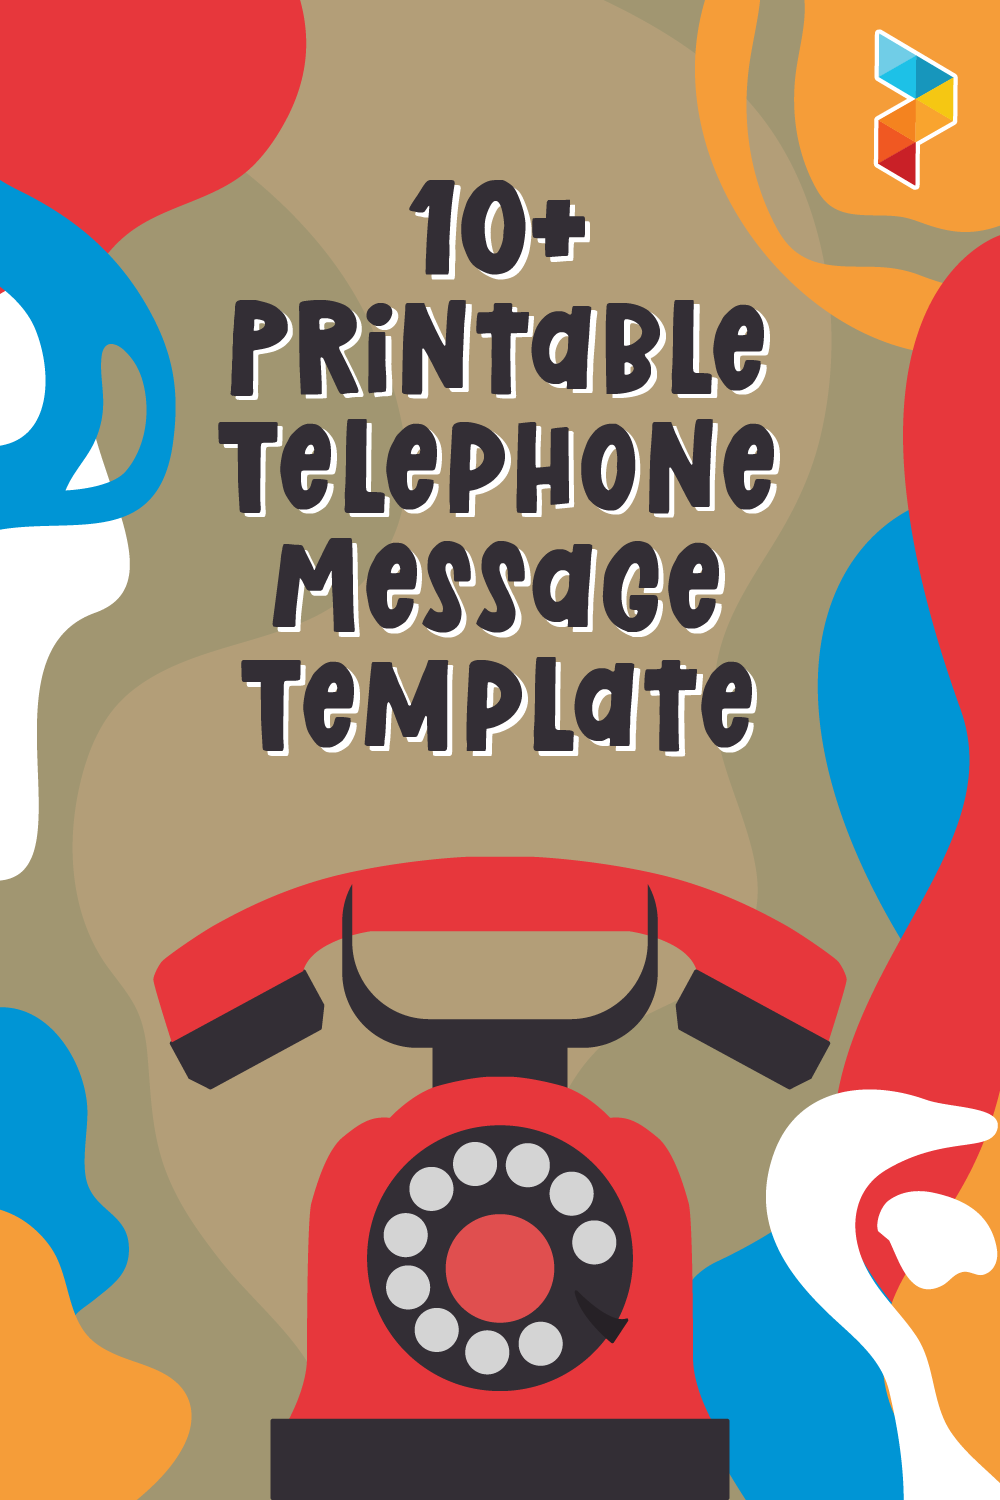 Telephone Message Template